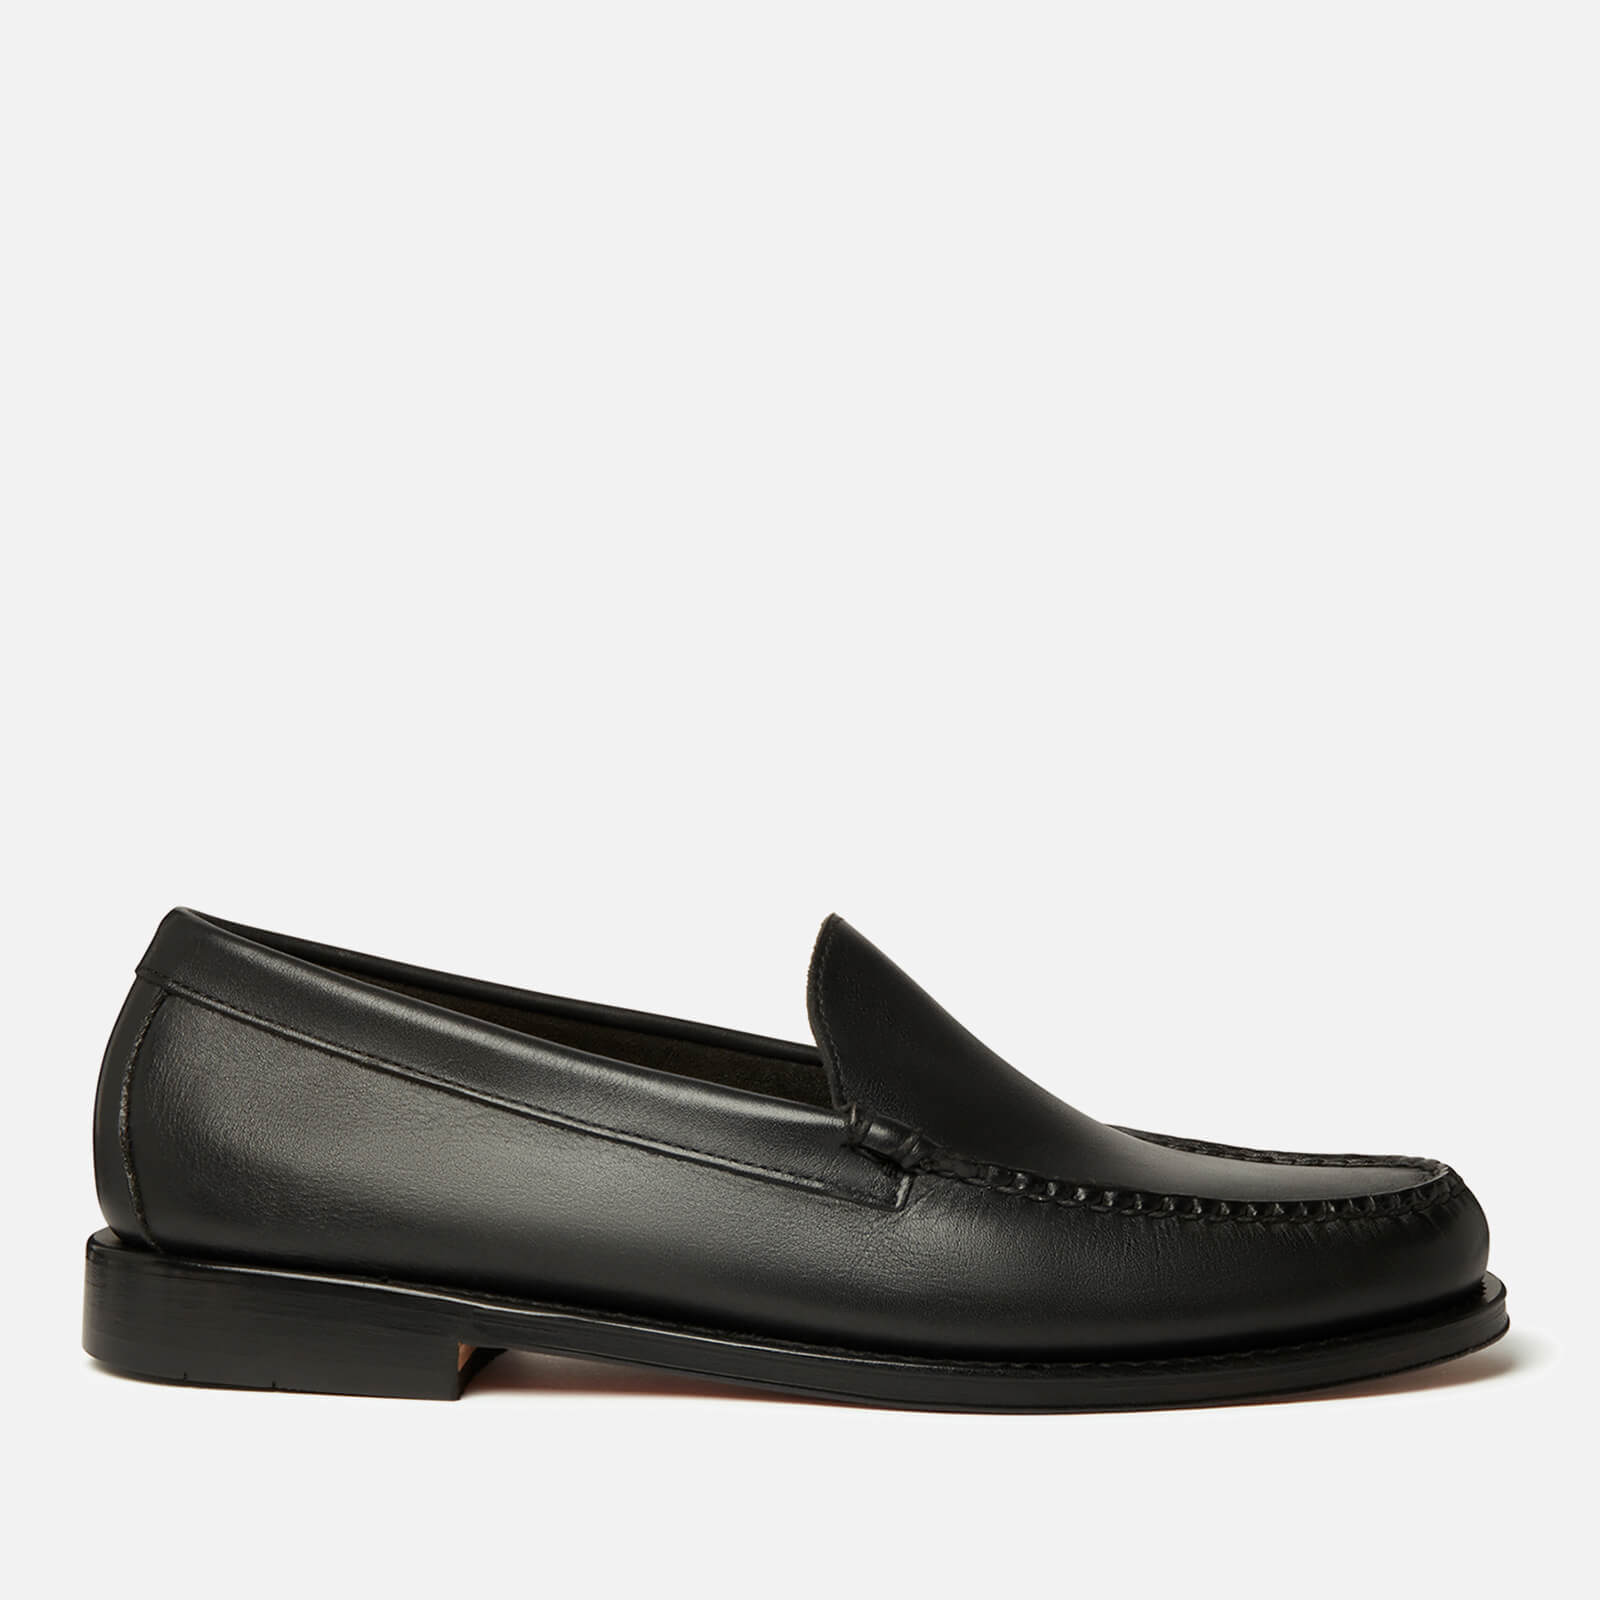 G.H Bass Men's Venetian Leather Loafers - UK 8